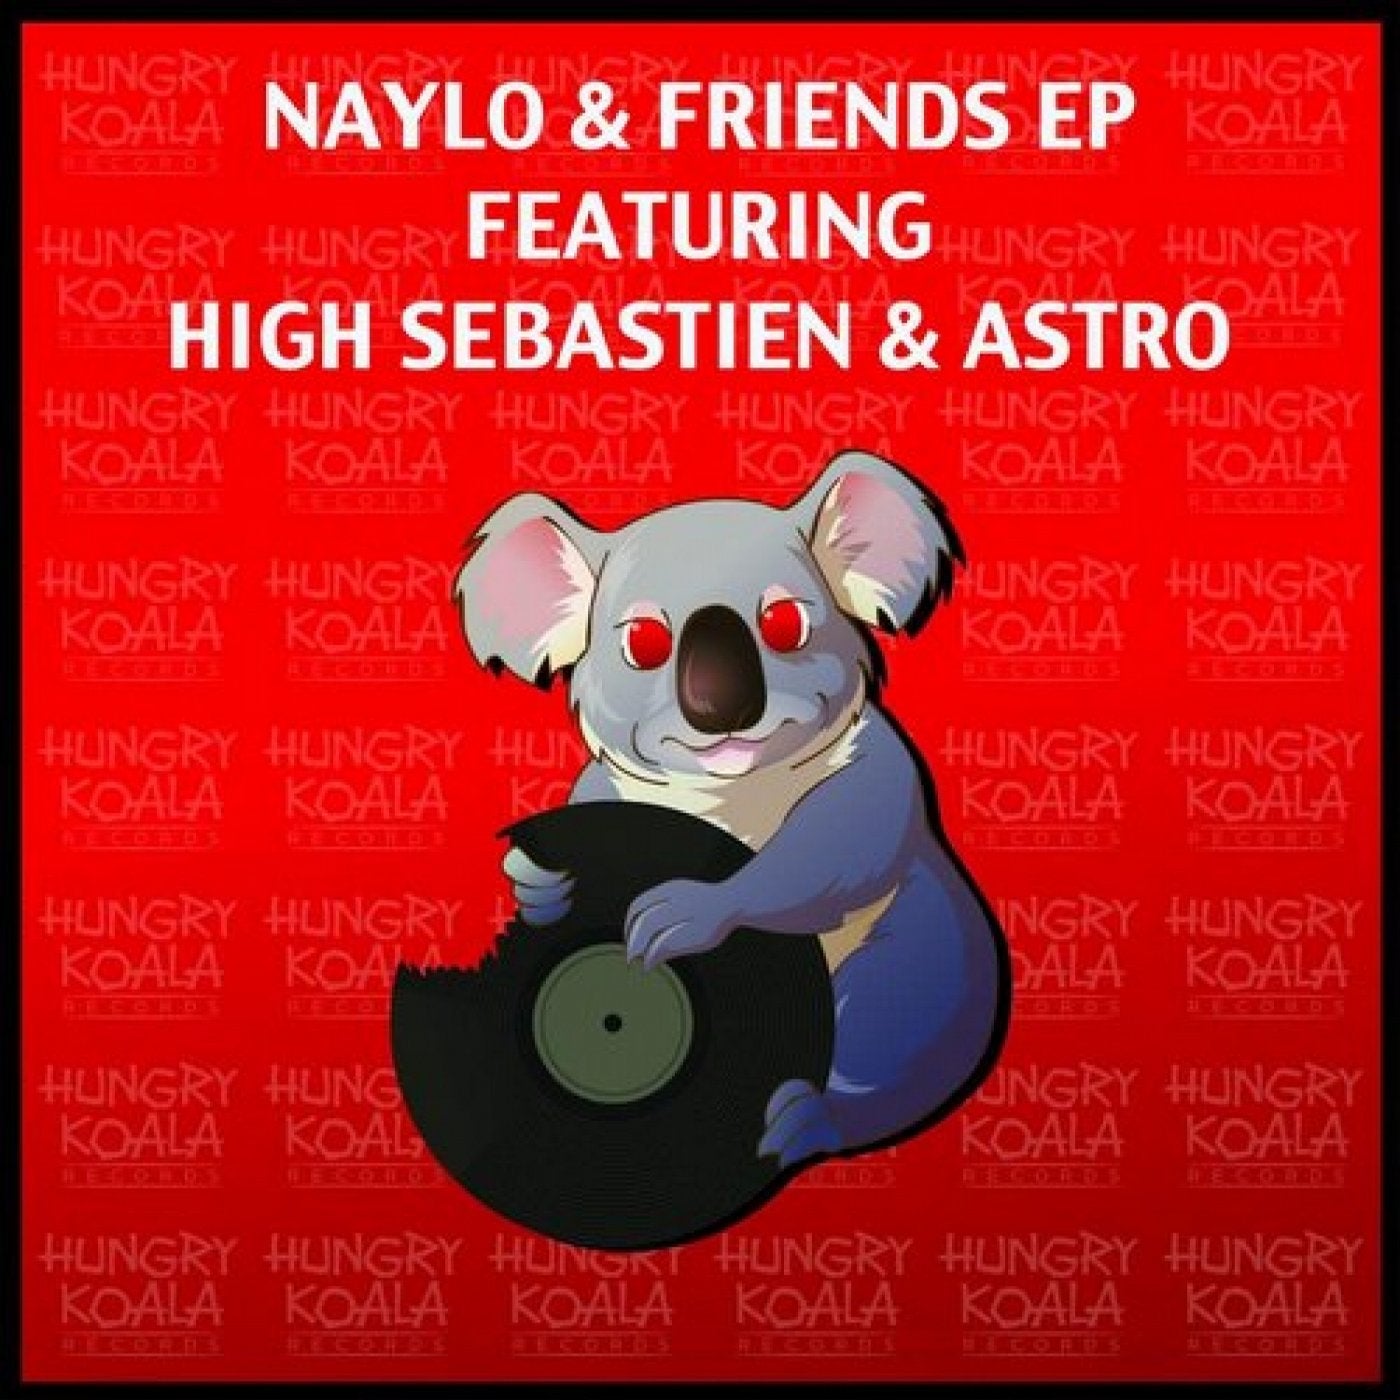 Naylo & Friends EP